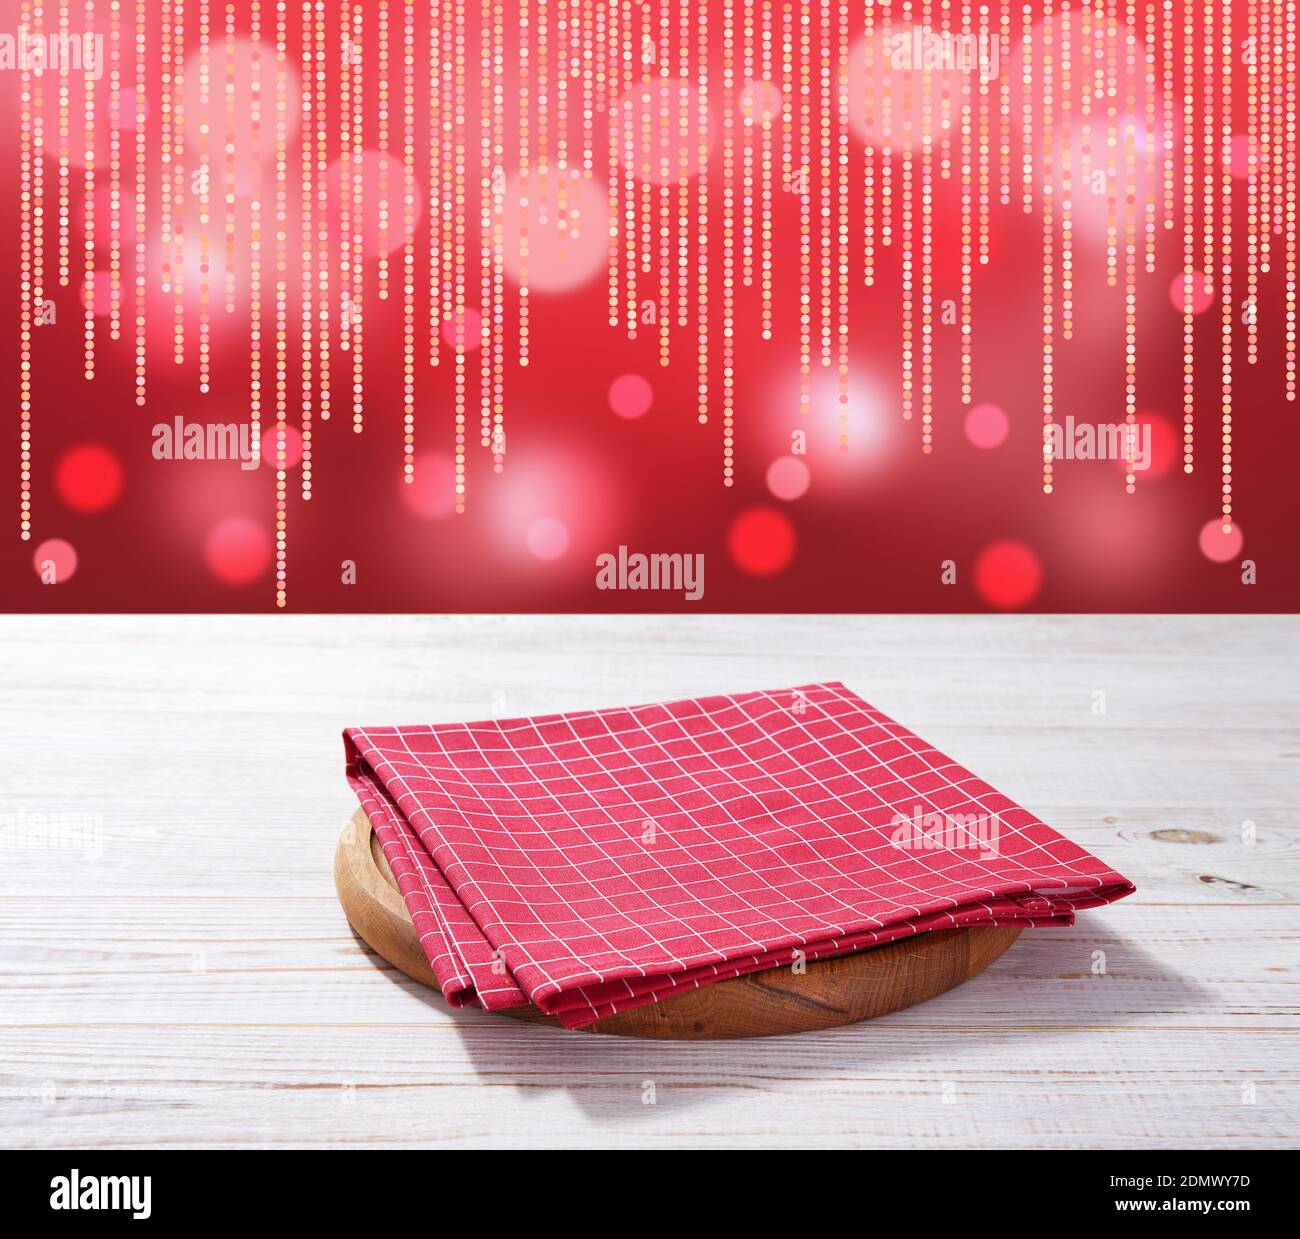 Red napkin on wooden table and Christmas background mockup. Stock Photo